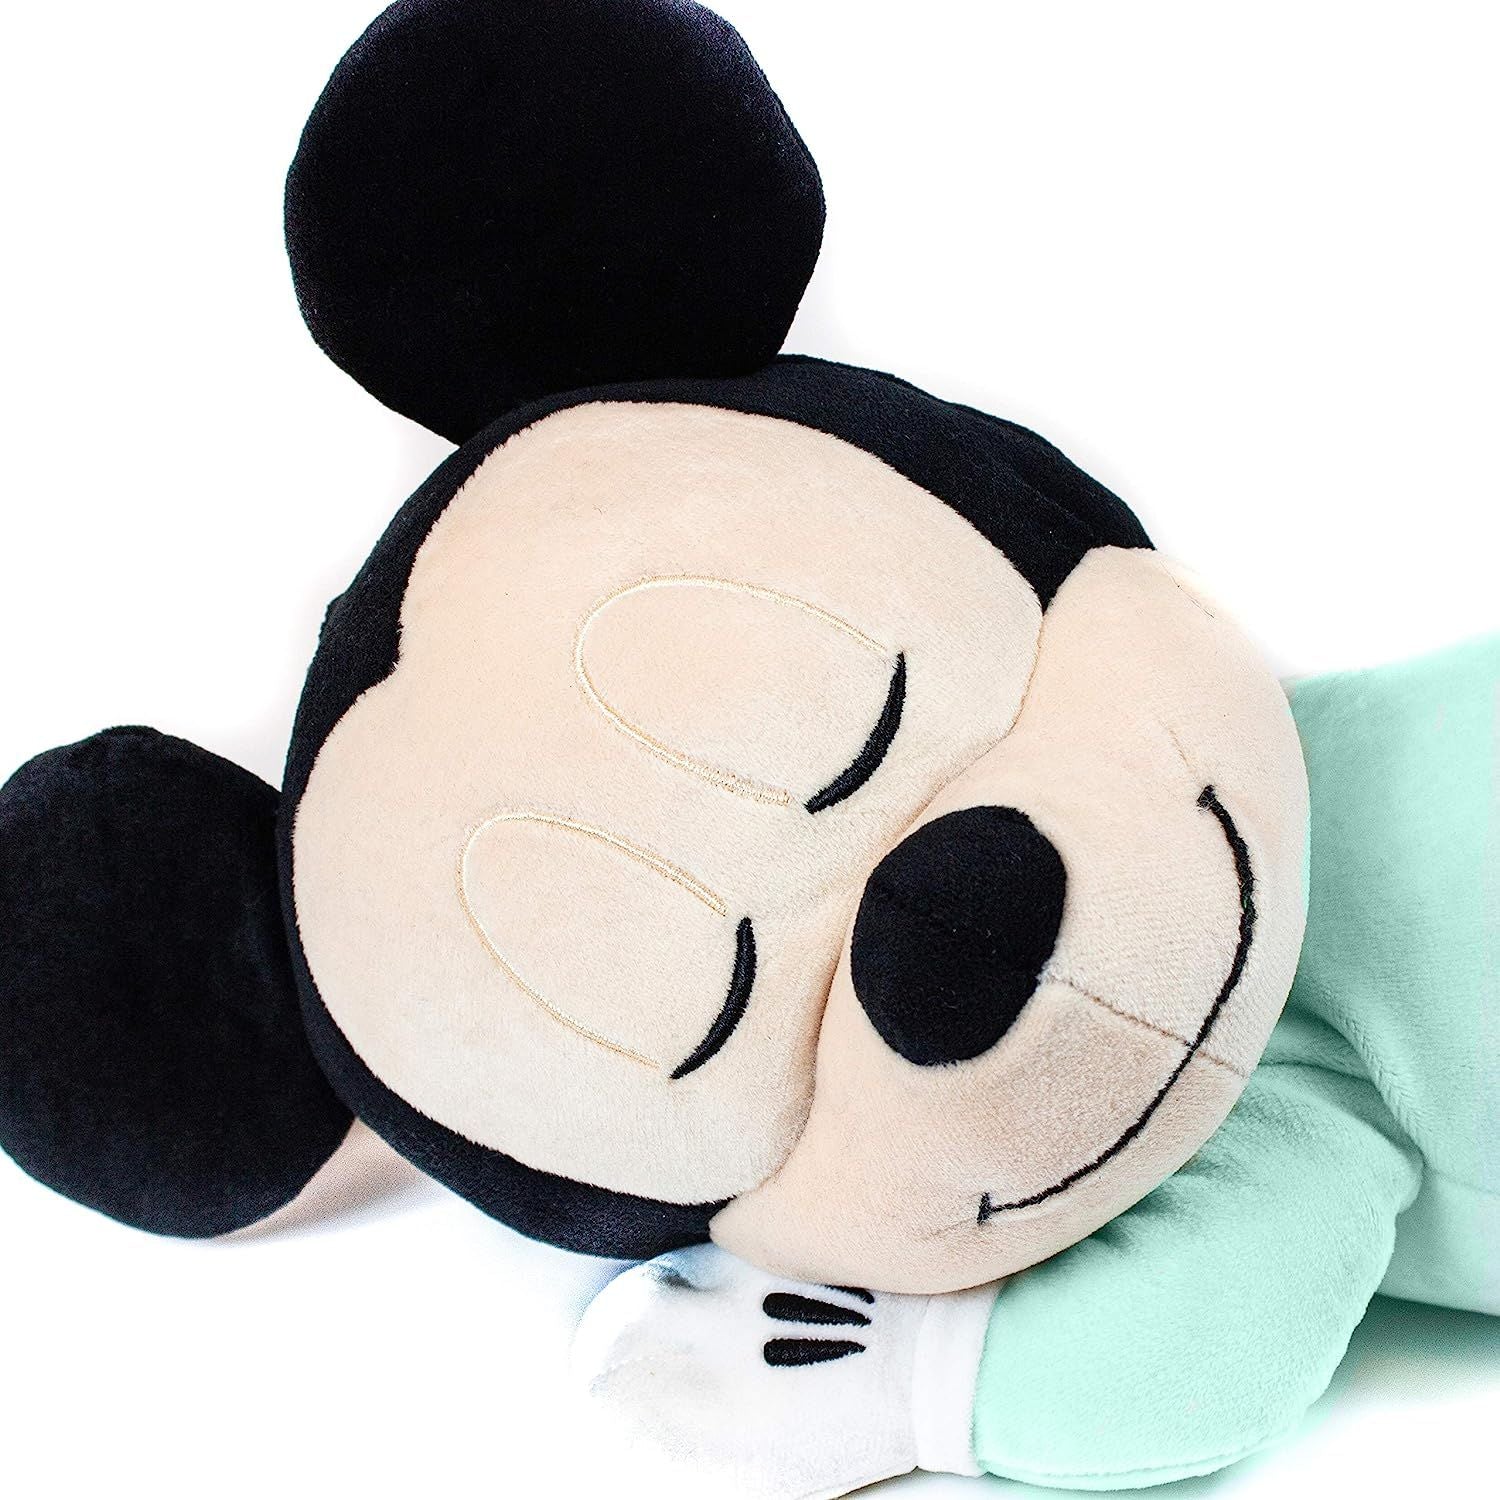 Disney - Sleeping Baby - Mickey Mouse Plush Face close up picture- Heretoserveyou